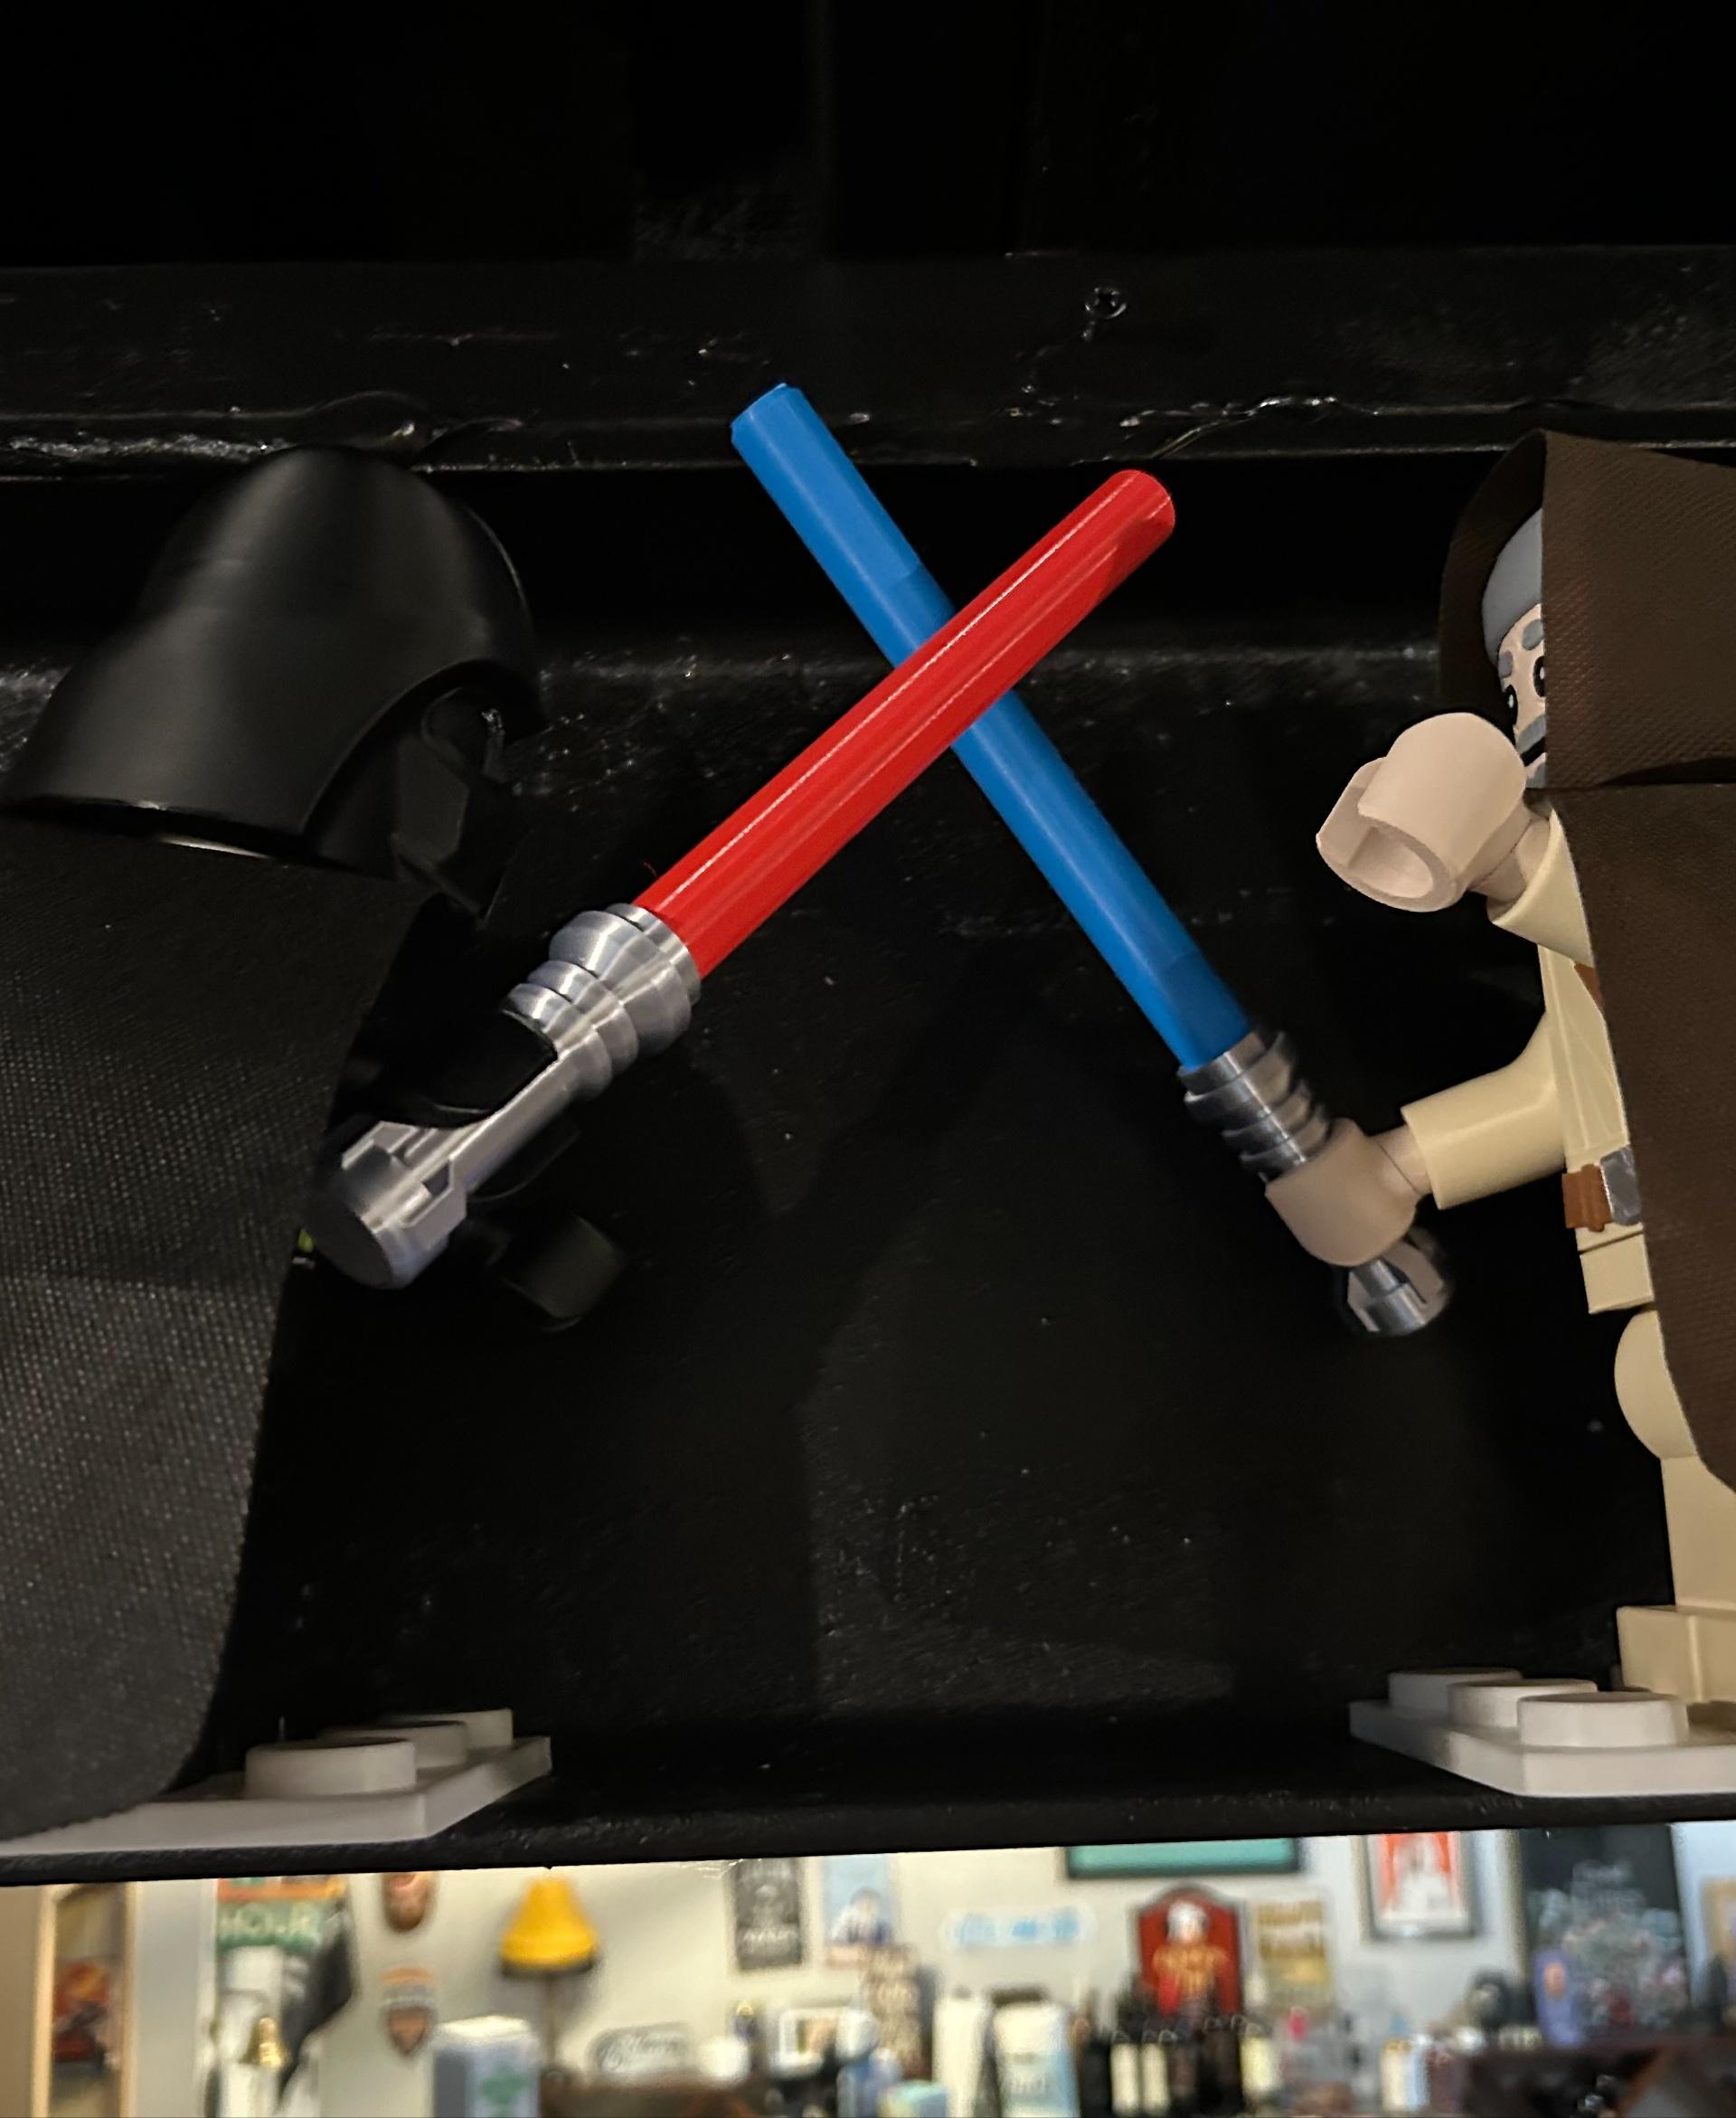 Darth Vader (9 inch brick figure, NO MMU/AMS, NO supports, NO glue) - This doesn't go well for Ben - 3d model